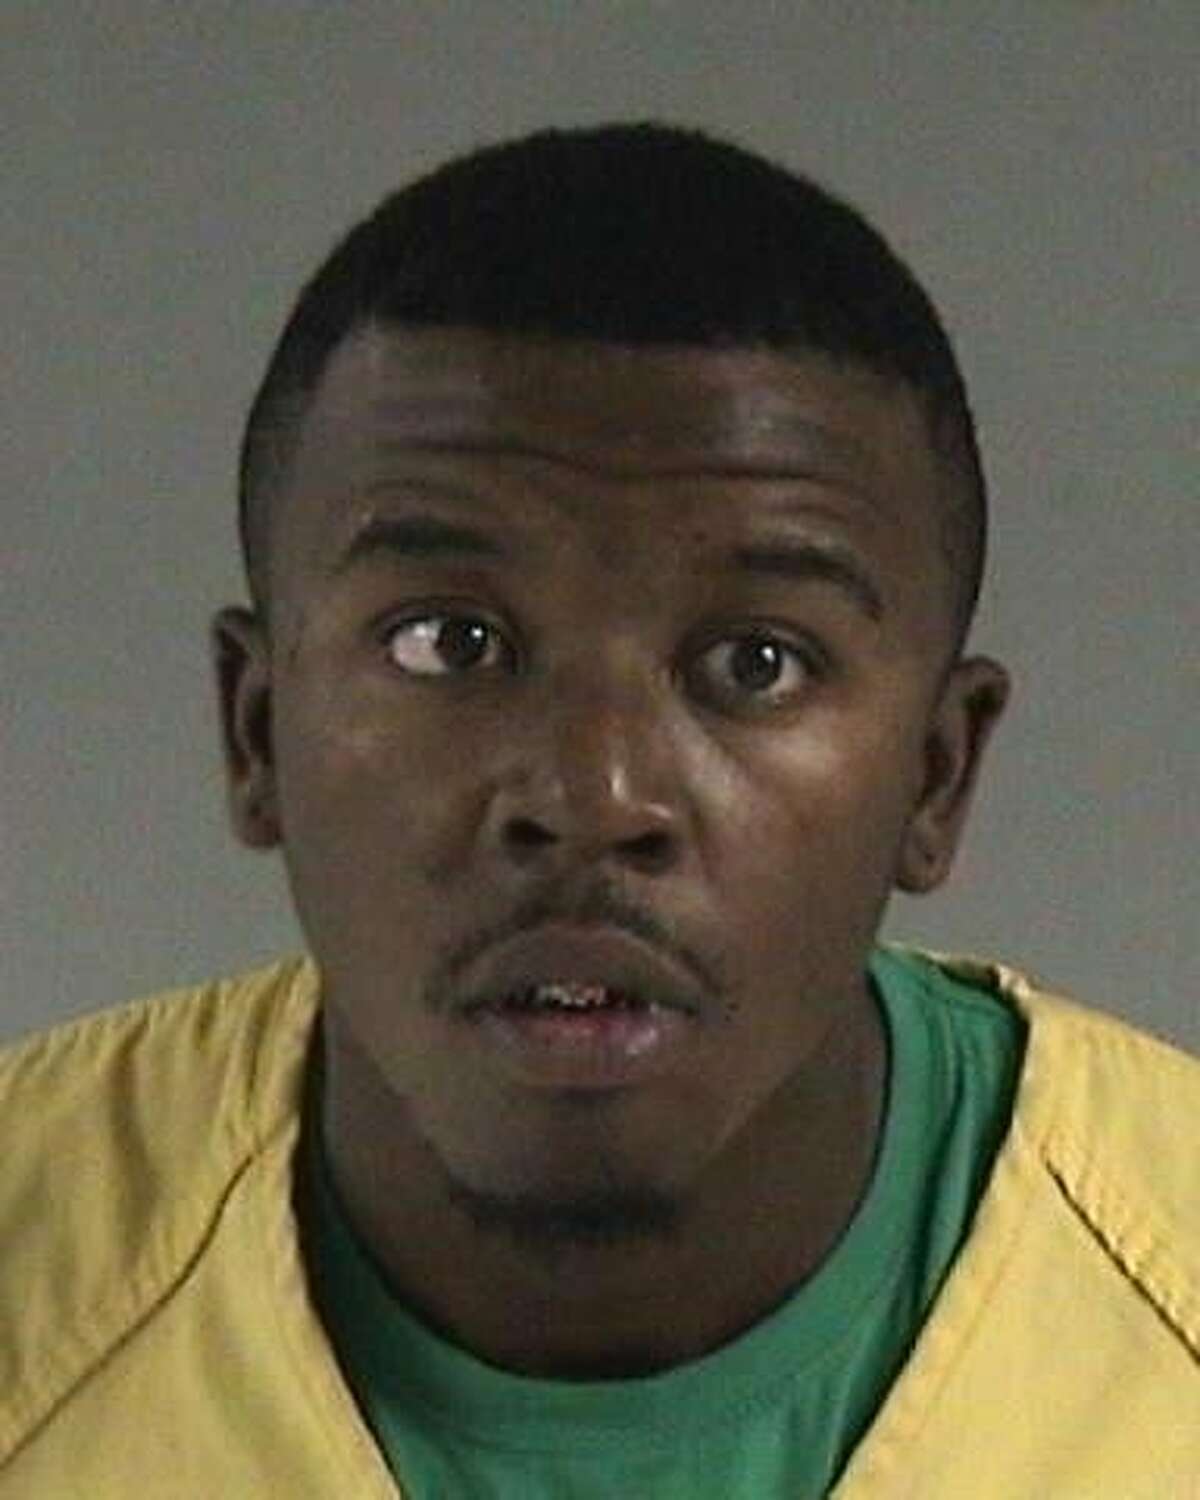 Dereak Turner, 24, shot and killed Thomas Cunningham, 38, outside a liquor store near Vermont and B streets in Hayward on Nov. 24, 2009, police said. Cunningham had been walking home with his 13-year-old daughter after buying some ice cream.